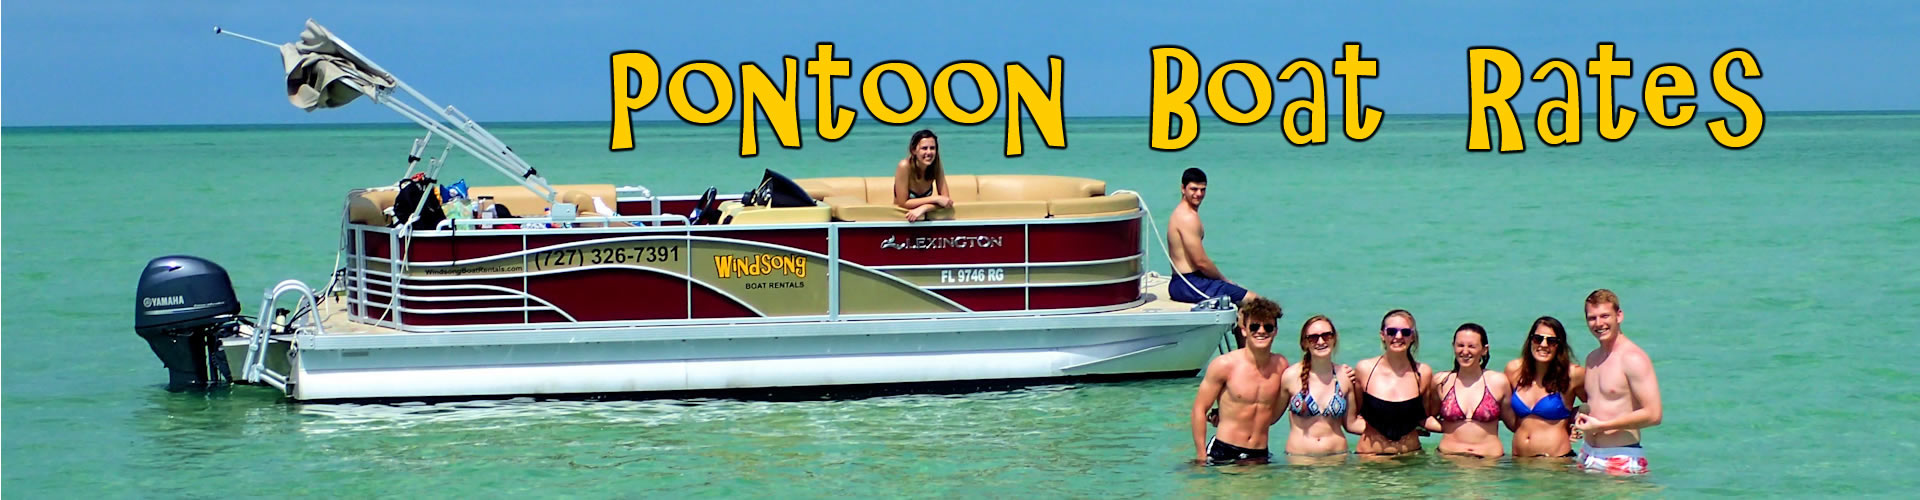 Boat Rental Rates, Tampa, Clearwater, St. Pete